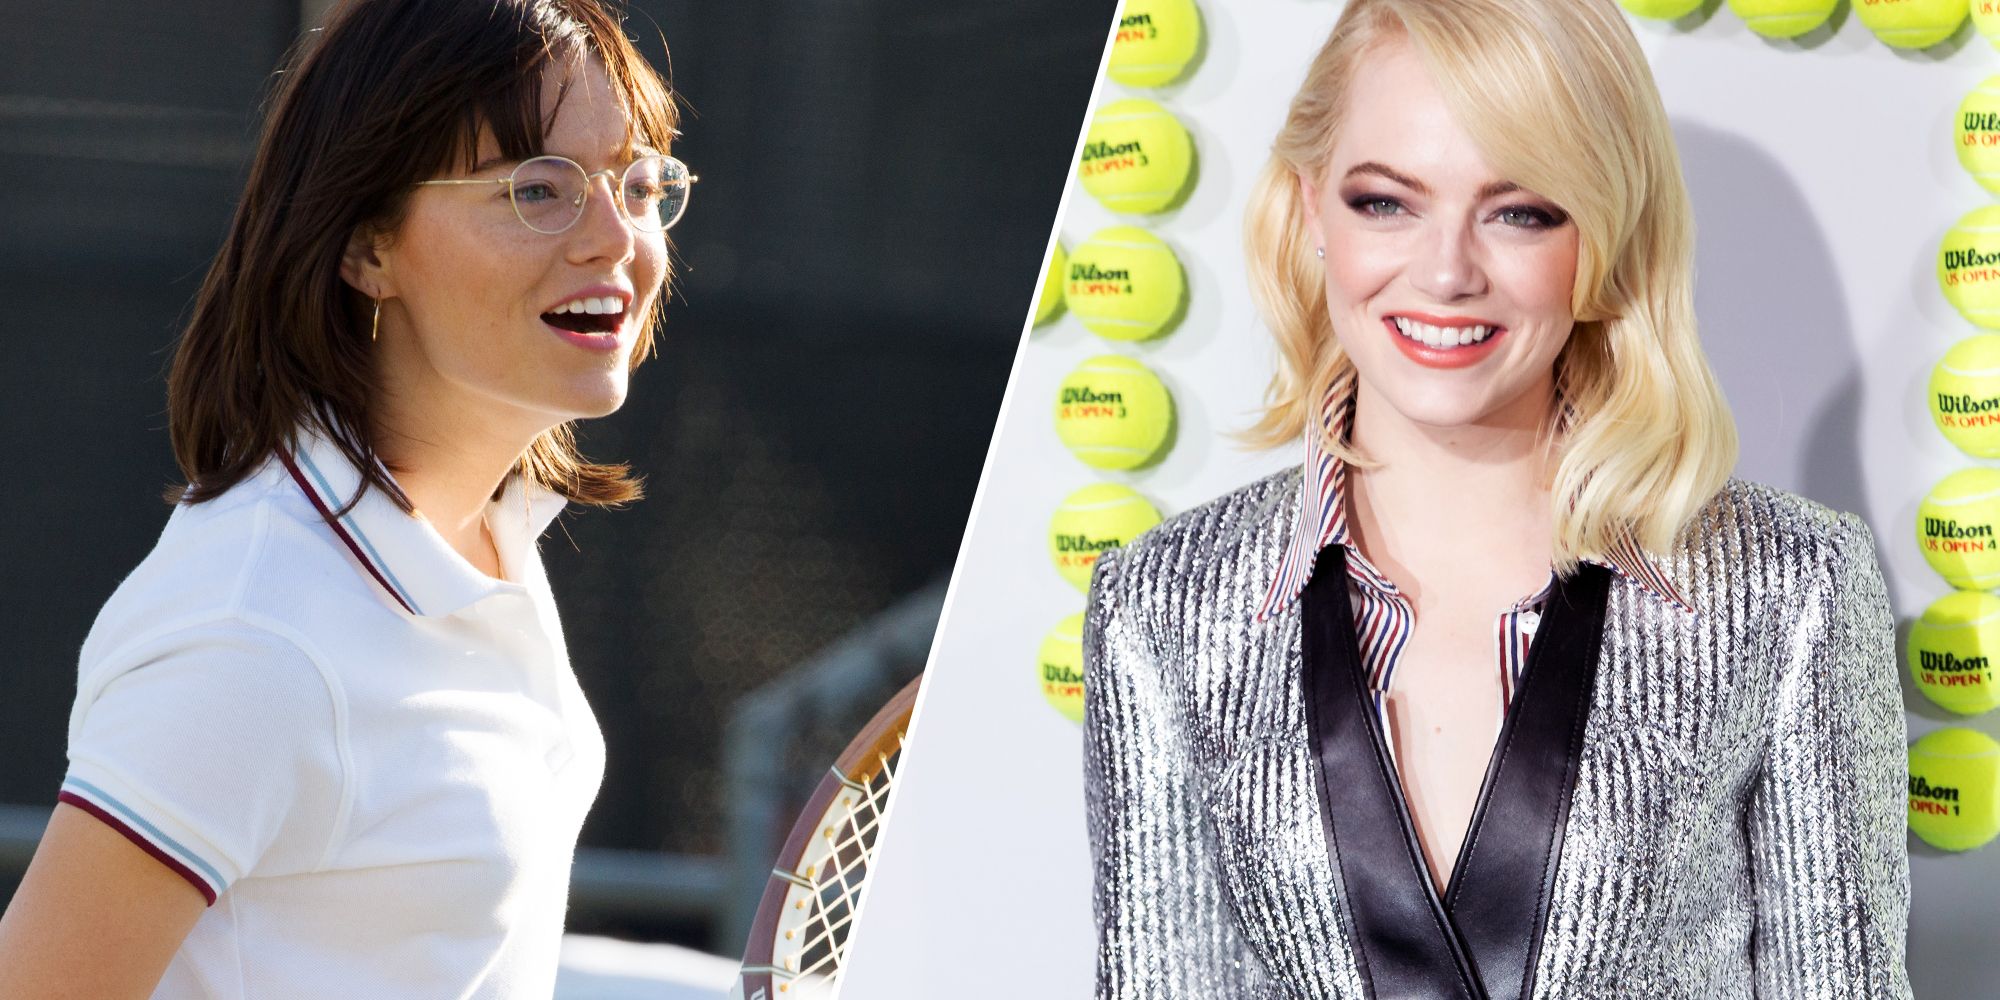 Emma Stone in costume as Billie Jean King on set of Battle Of The